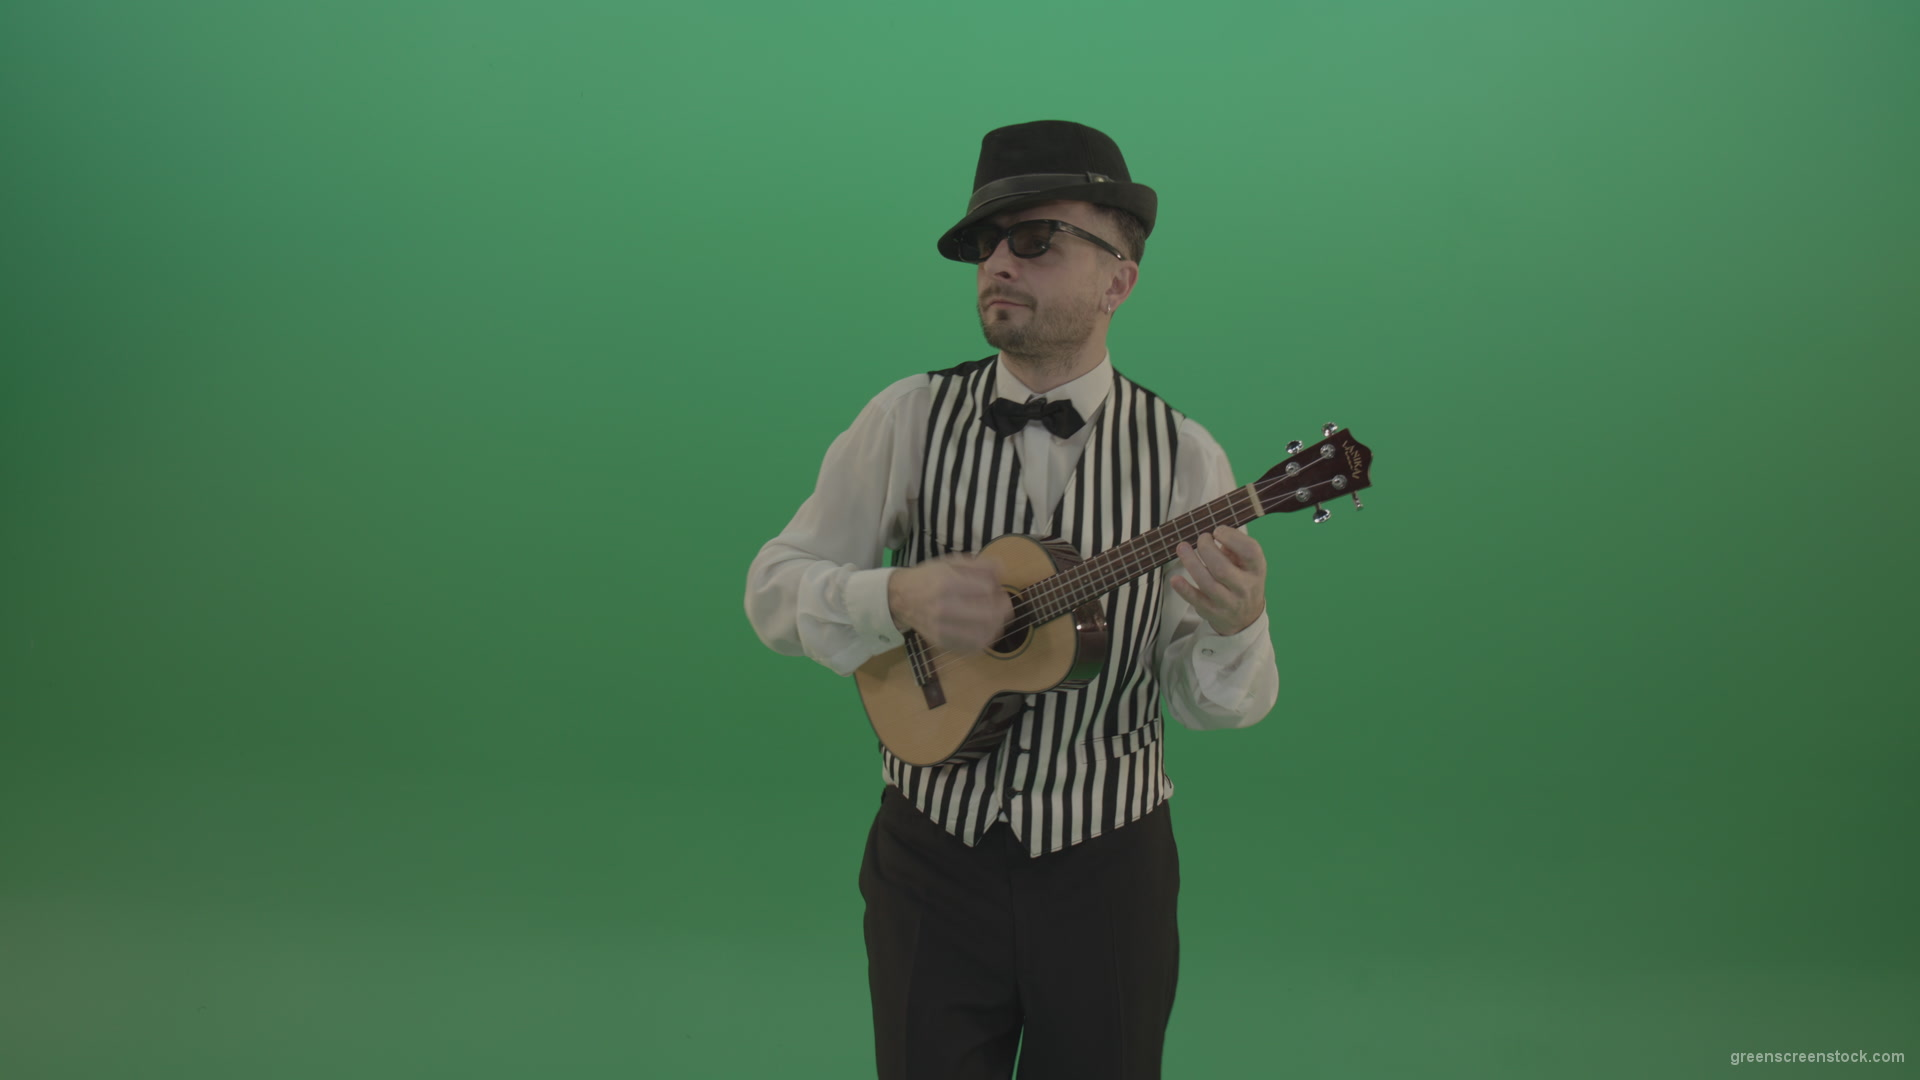 Funny-guitar-player-with-small-classic-guitar-on-chromakey-green-screen_008 Green Screen Stock